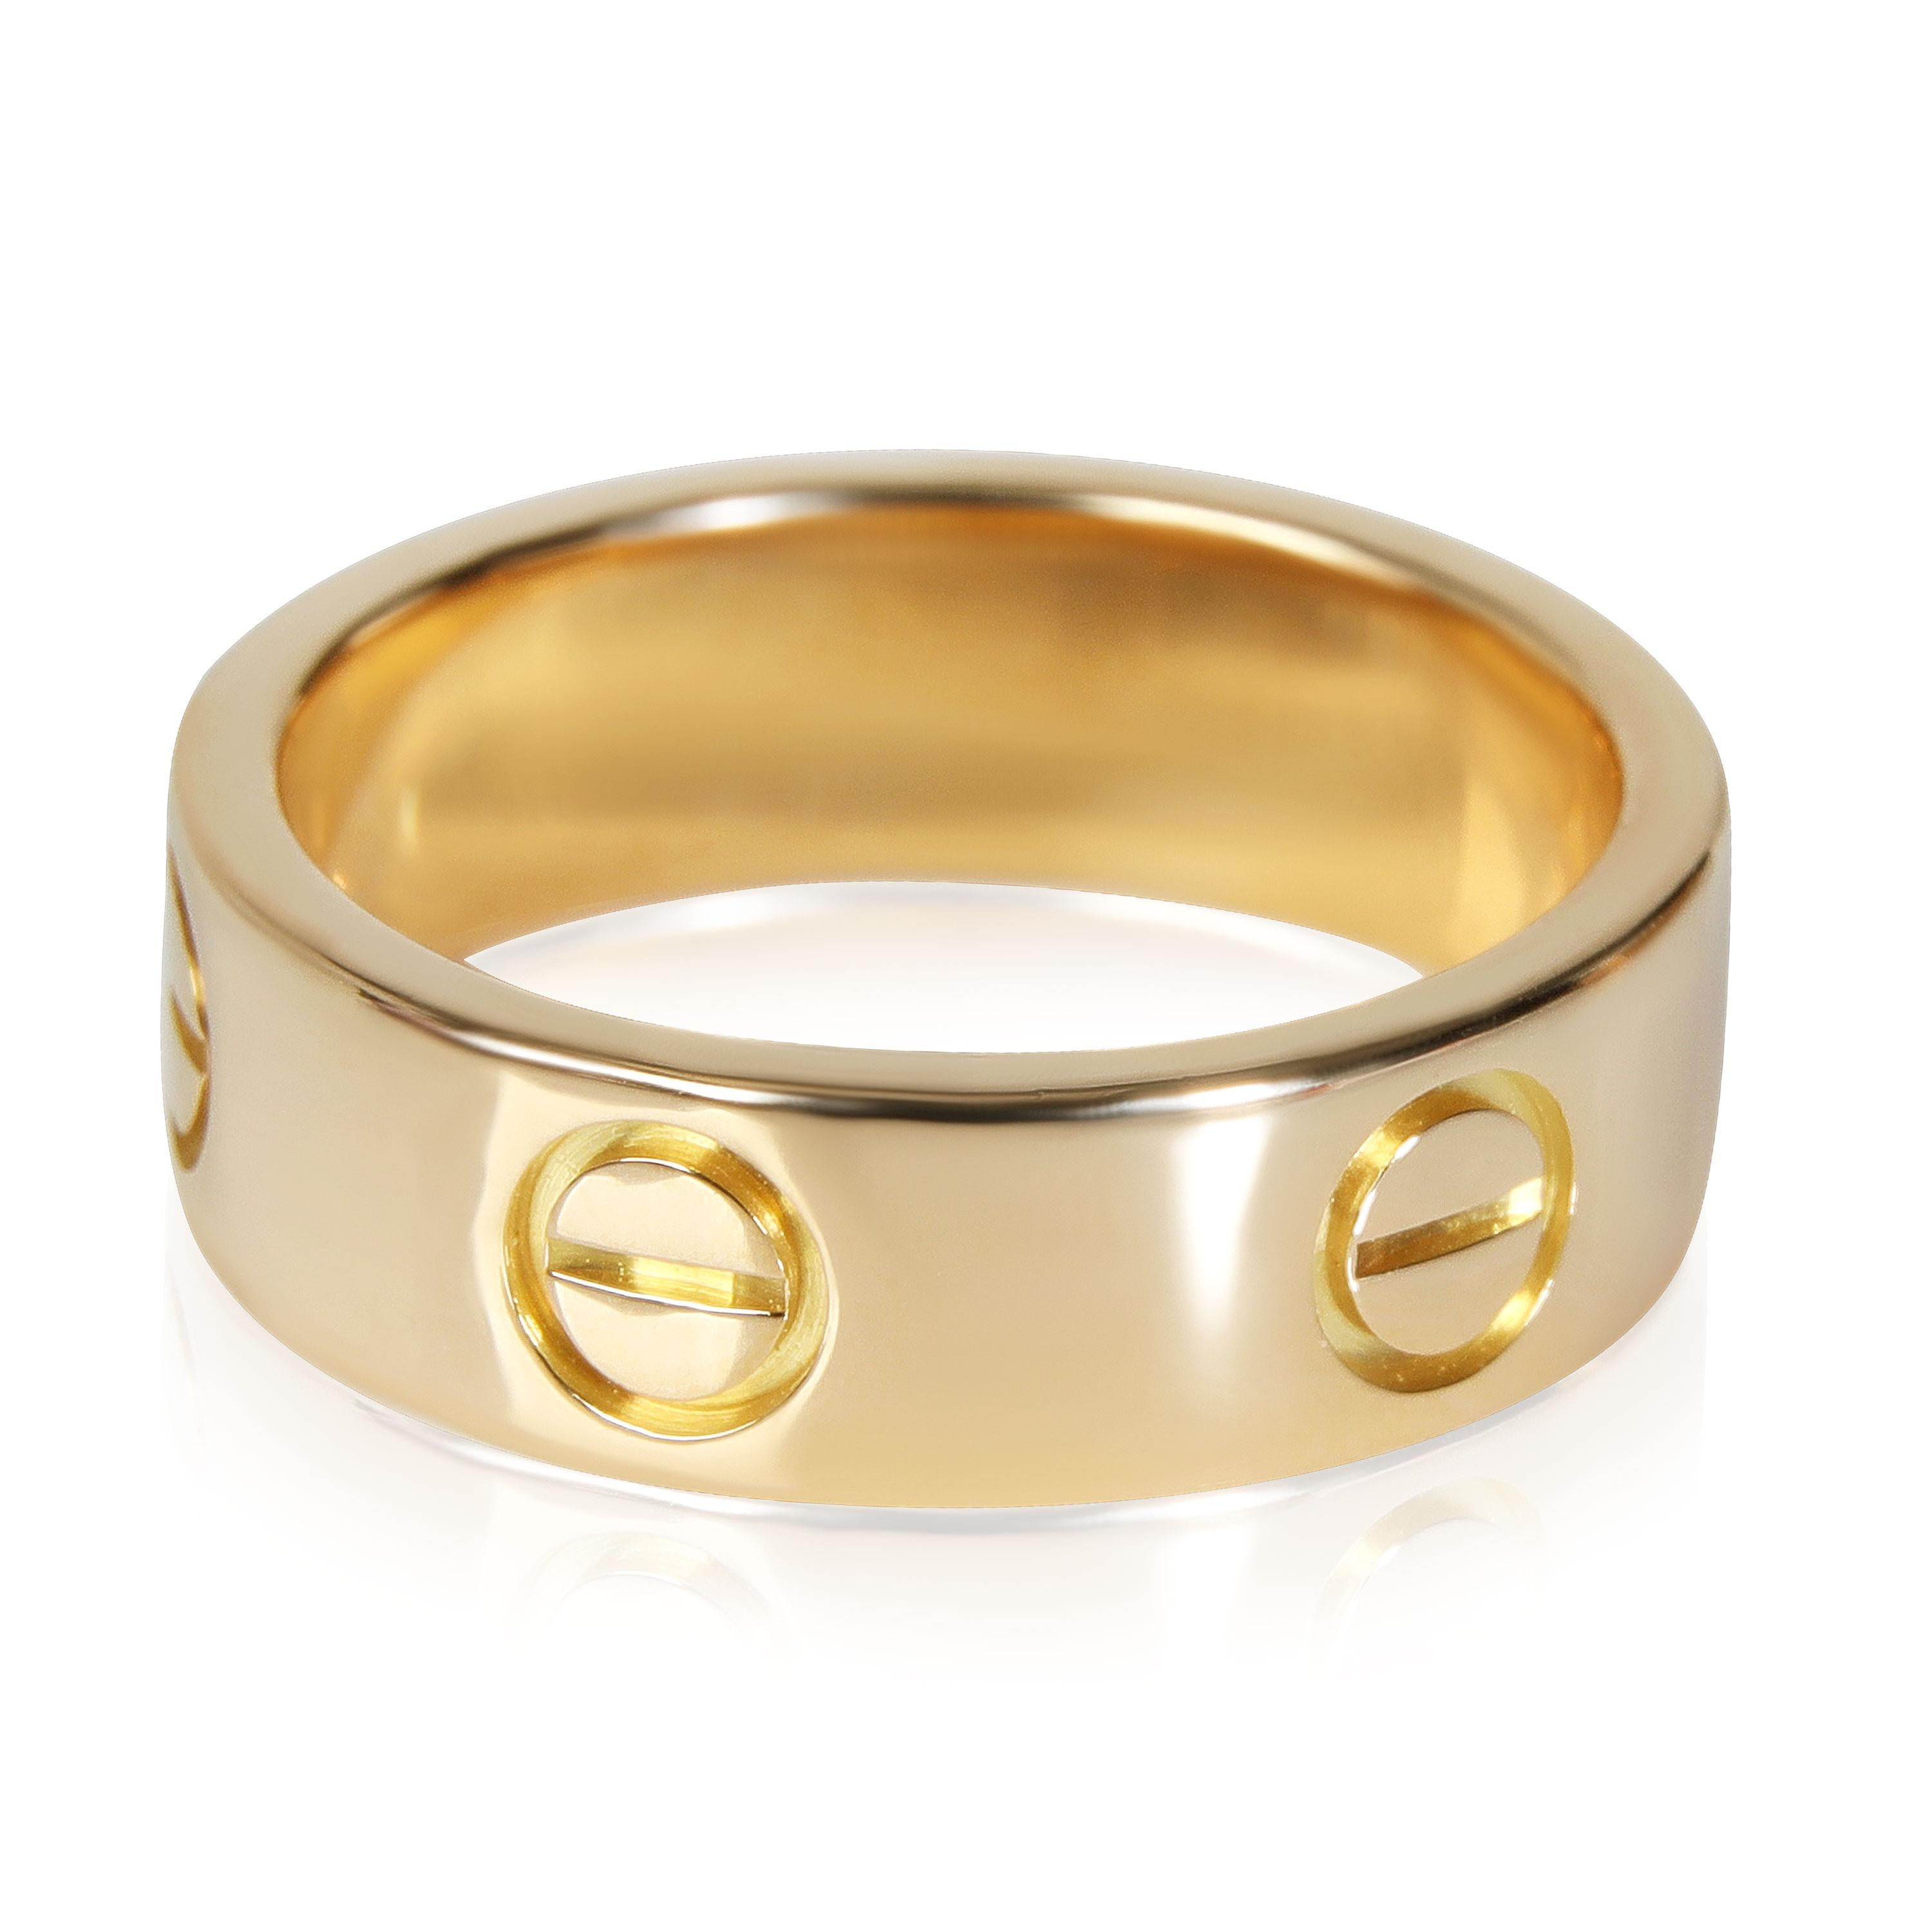 Cartier Love Ring in 18k Yellow Gold

PRIMARY DETAILS
SKU: 115567
Listing Title: Cartier Love Ring in 18k Yellow Gold
Condition Description: Retails for 1820 USD. In excellent condition and recently polished. Ring size is 5.75.Comes with Service